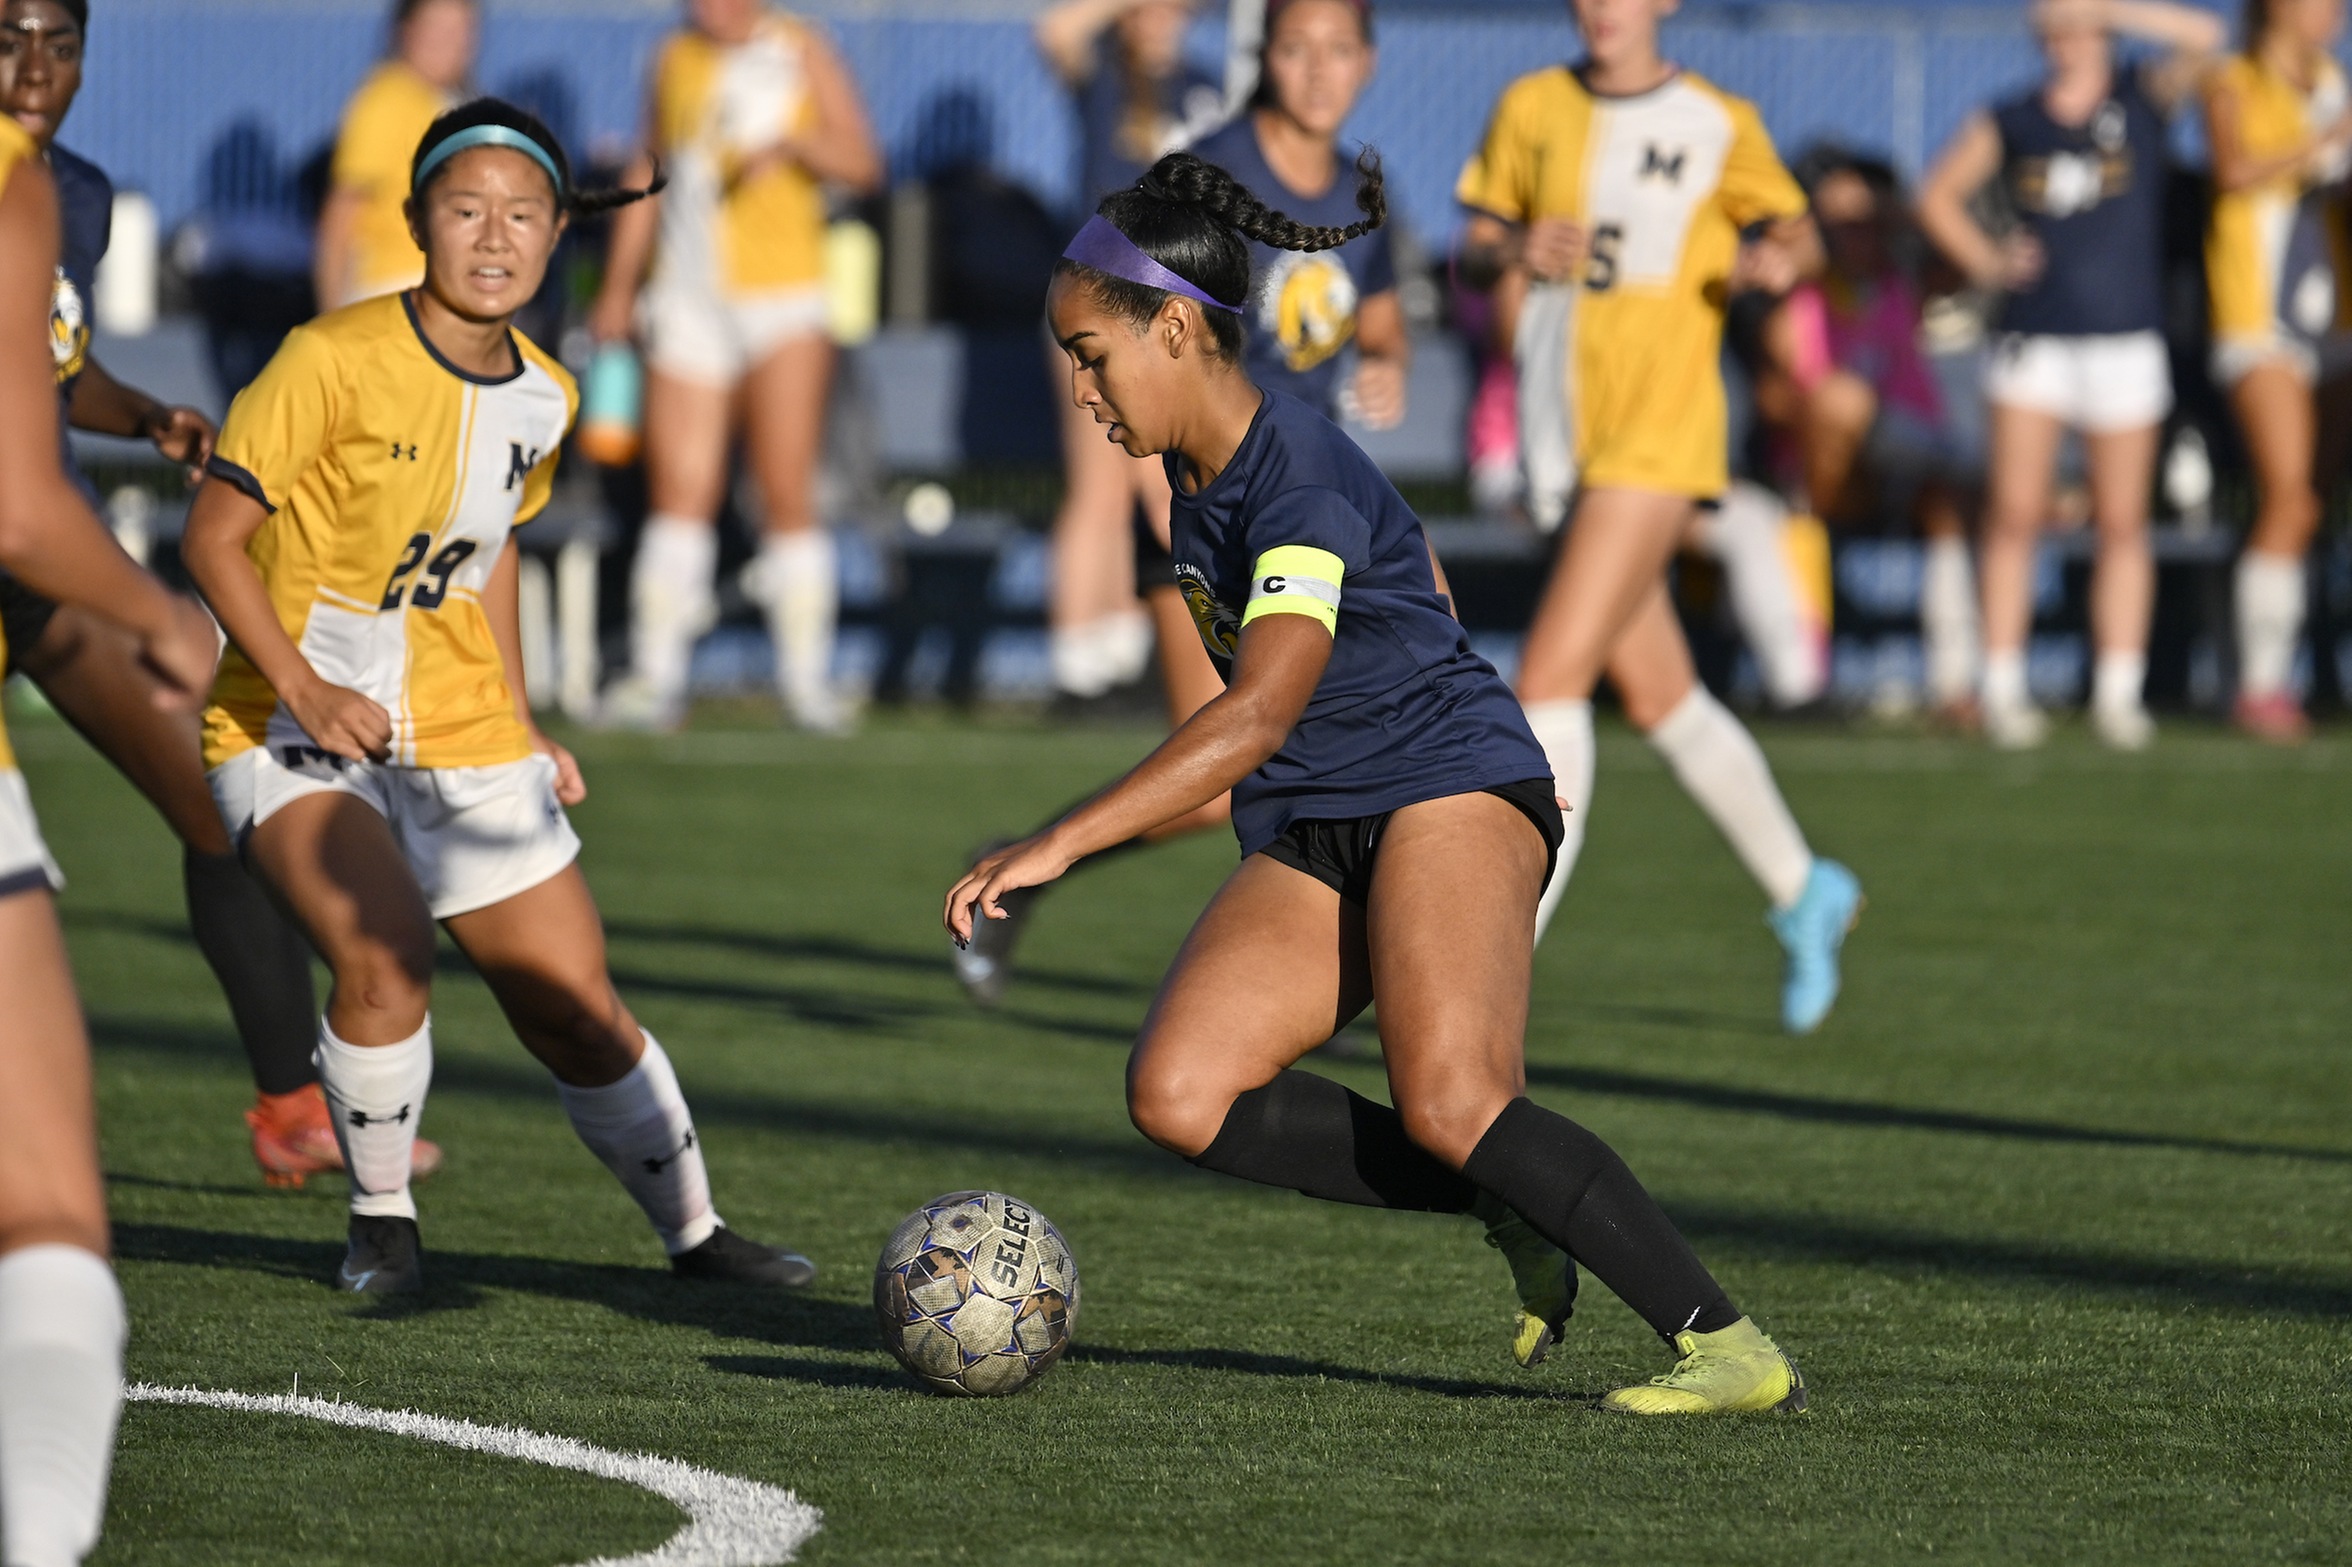 College of the Canyons women's soccer student-athlete Lauryn Bailey action image.